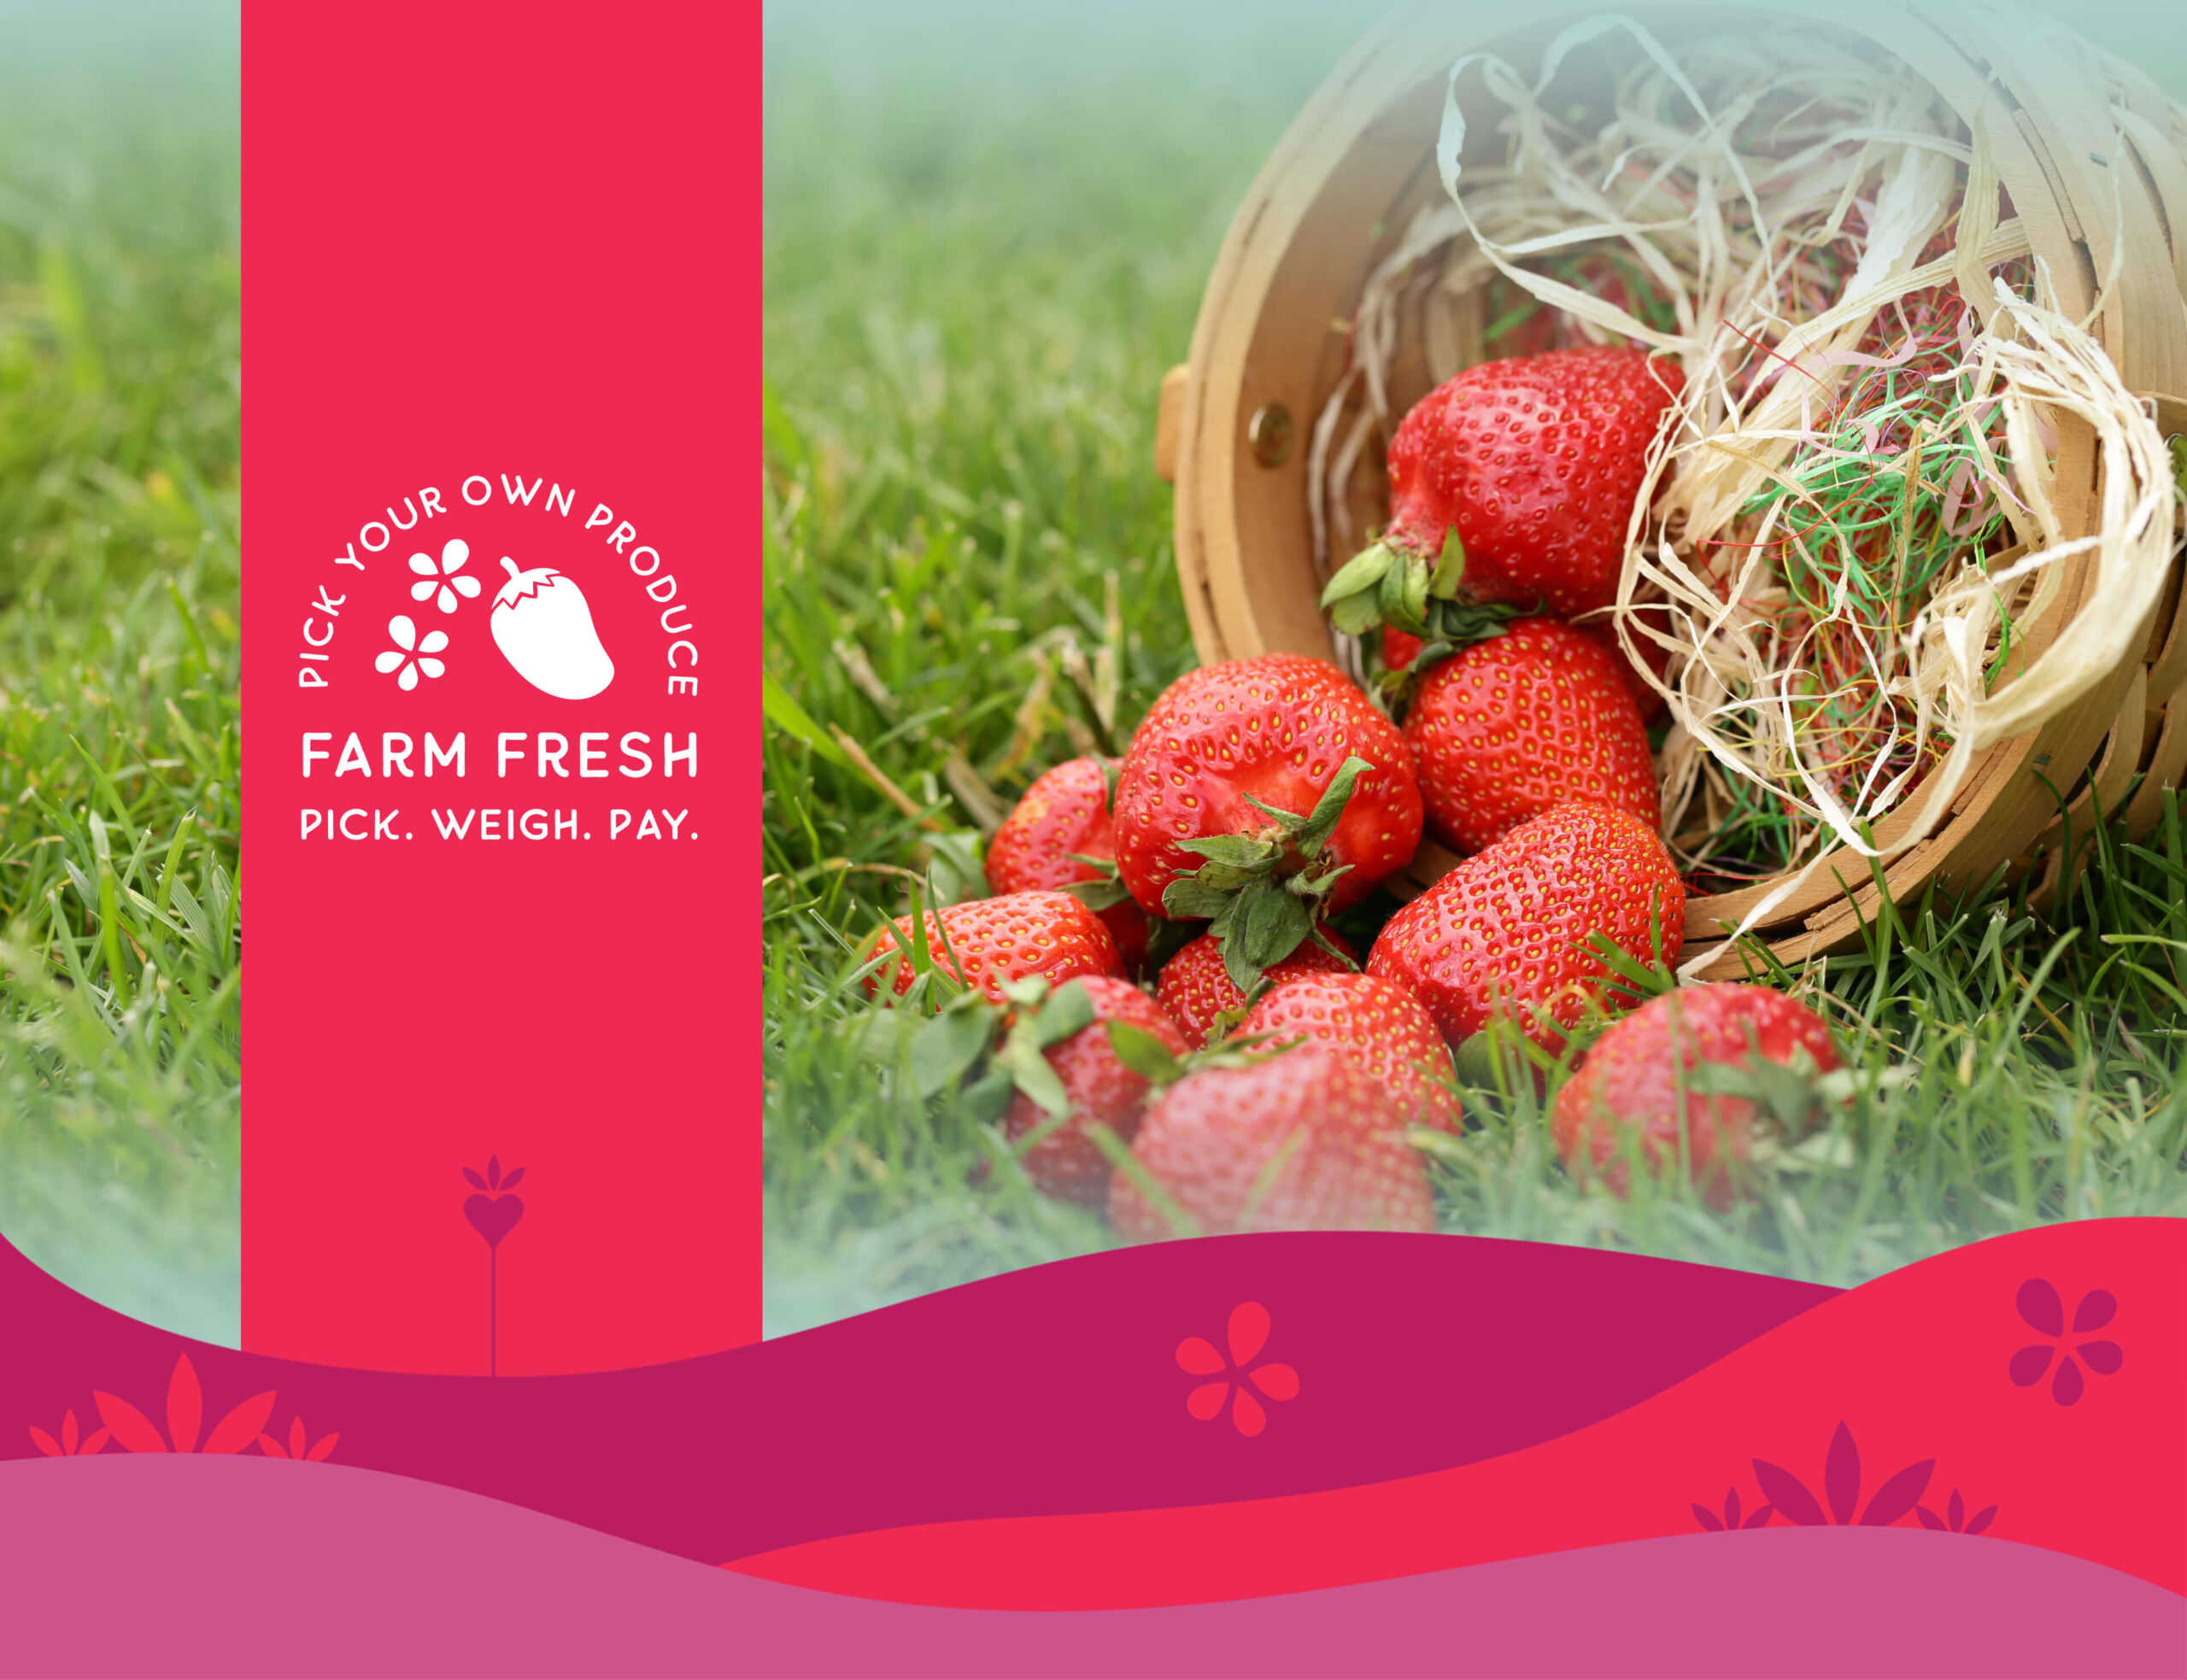 Pick your own berries on our strawberry farm